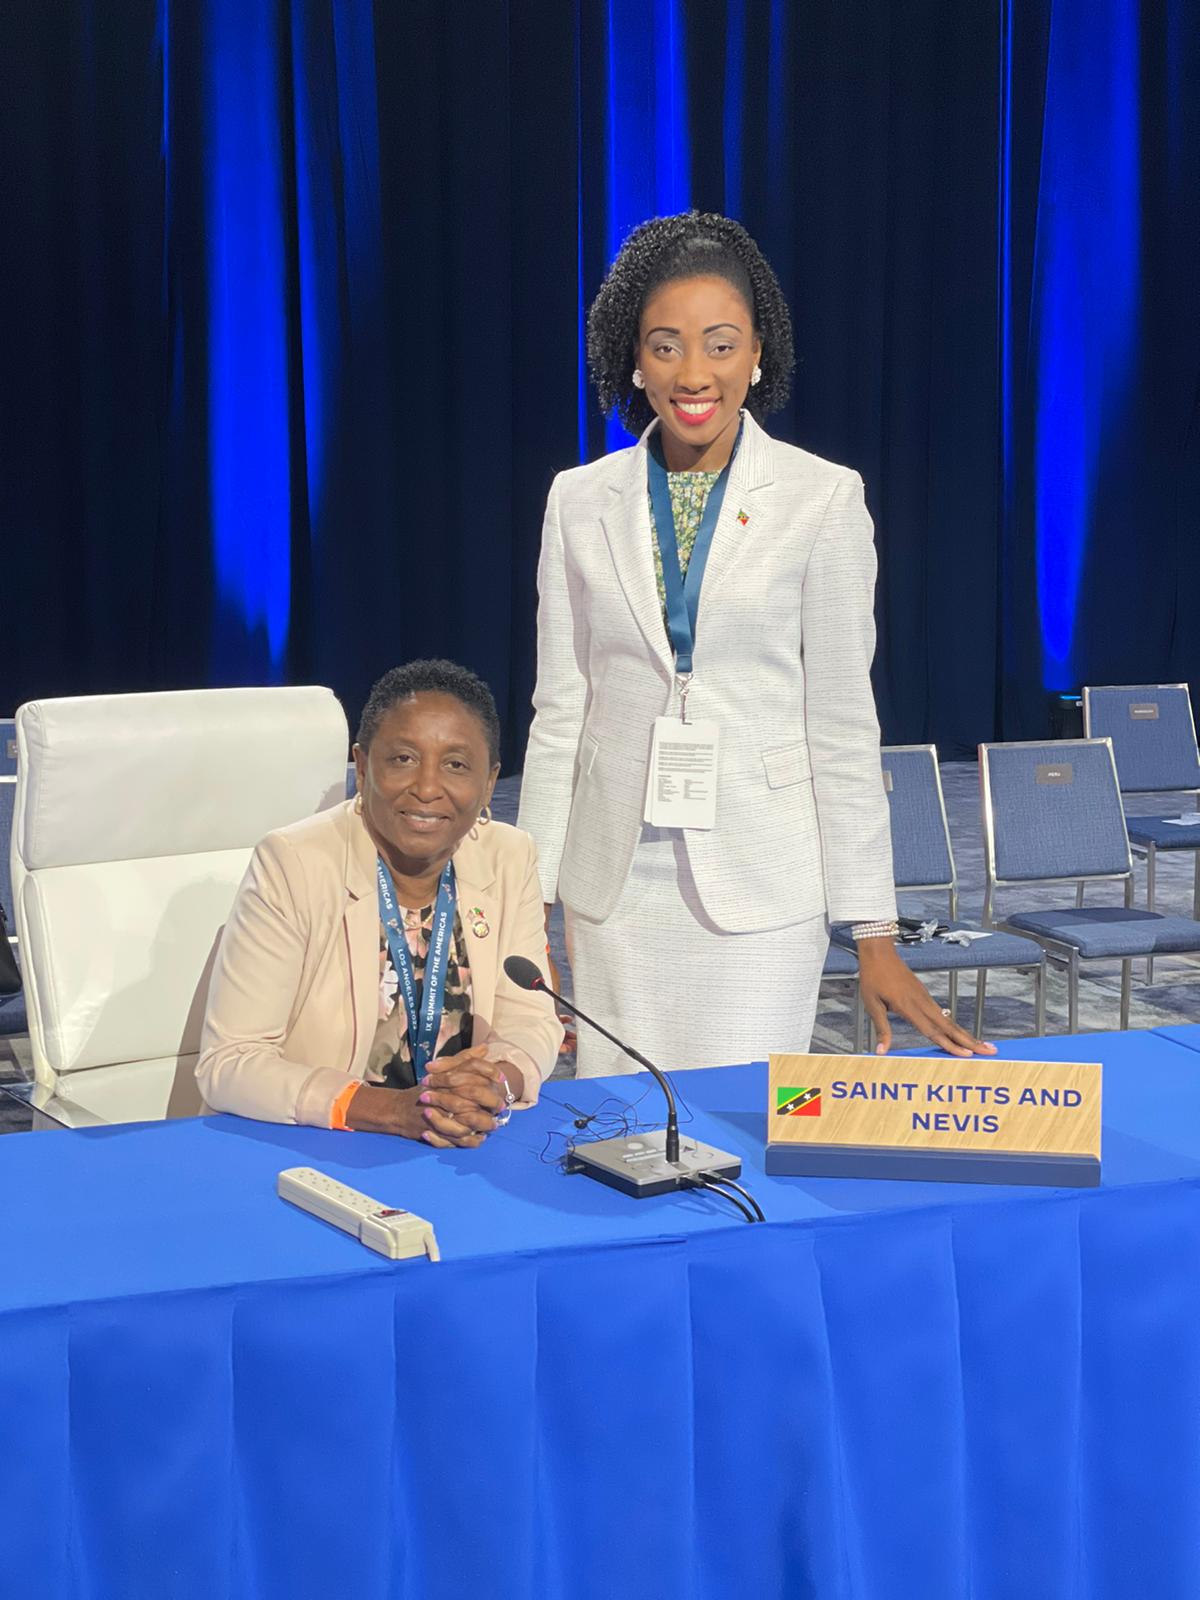 Saint Kitts and Nevis diplomats participate in Ninth Summit of the Americas